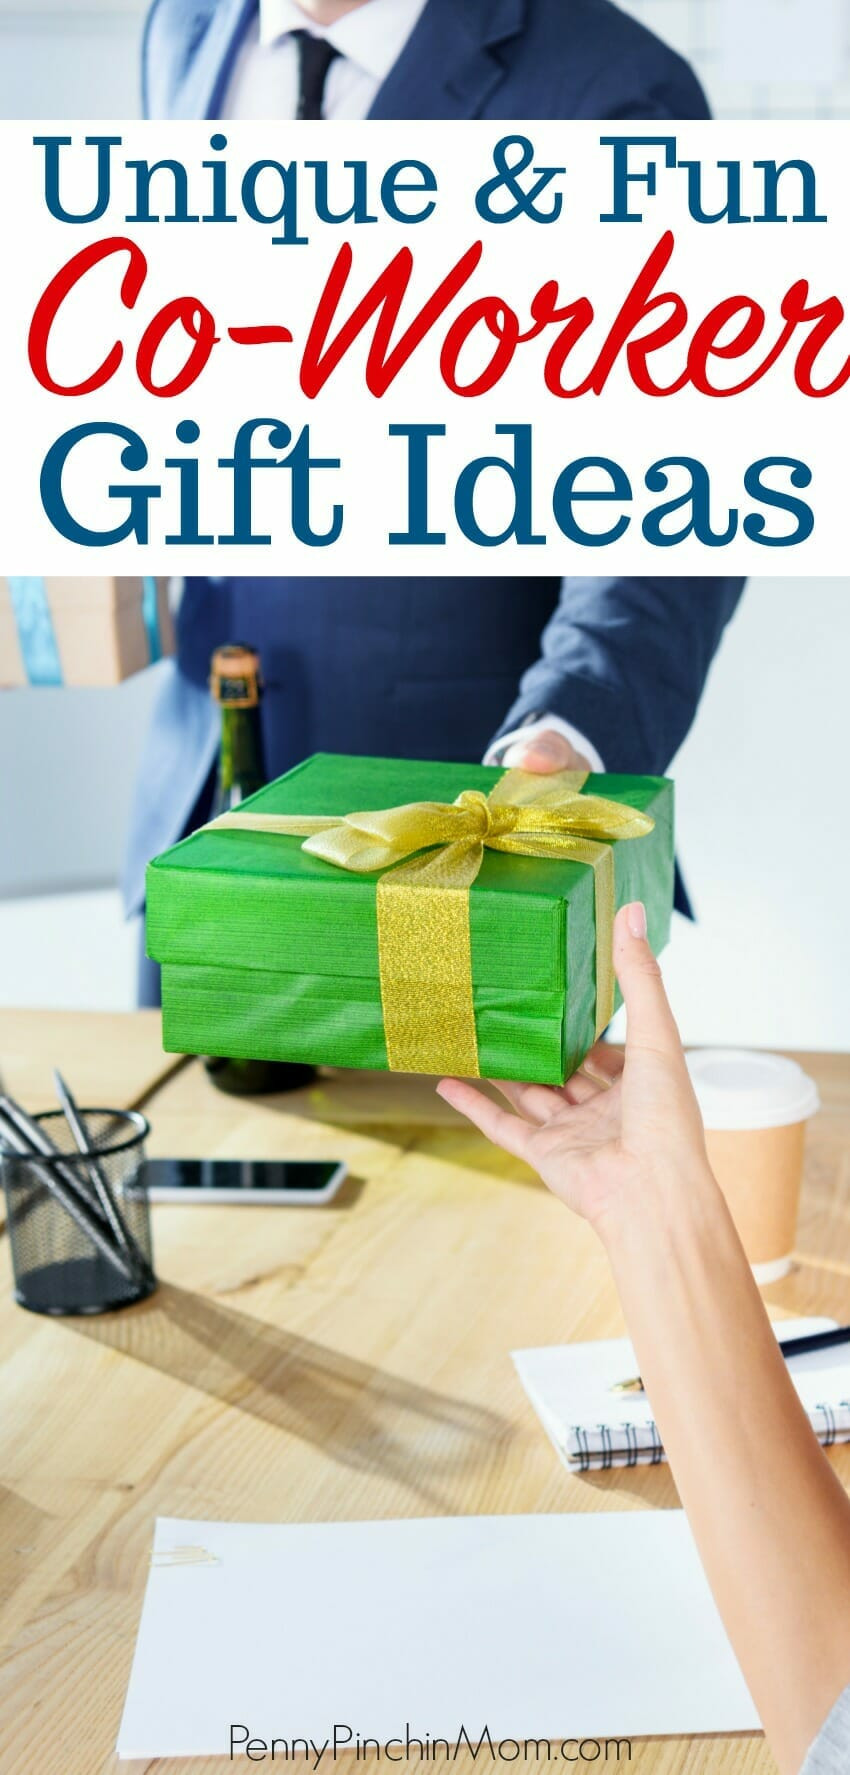 Christmas Gift Ideas For Employees
 Co Worker Gift Ideas for Anyone on Your List This Year